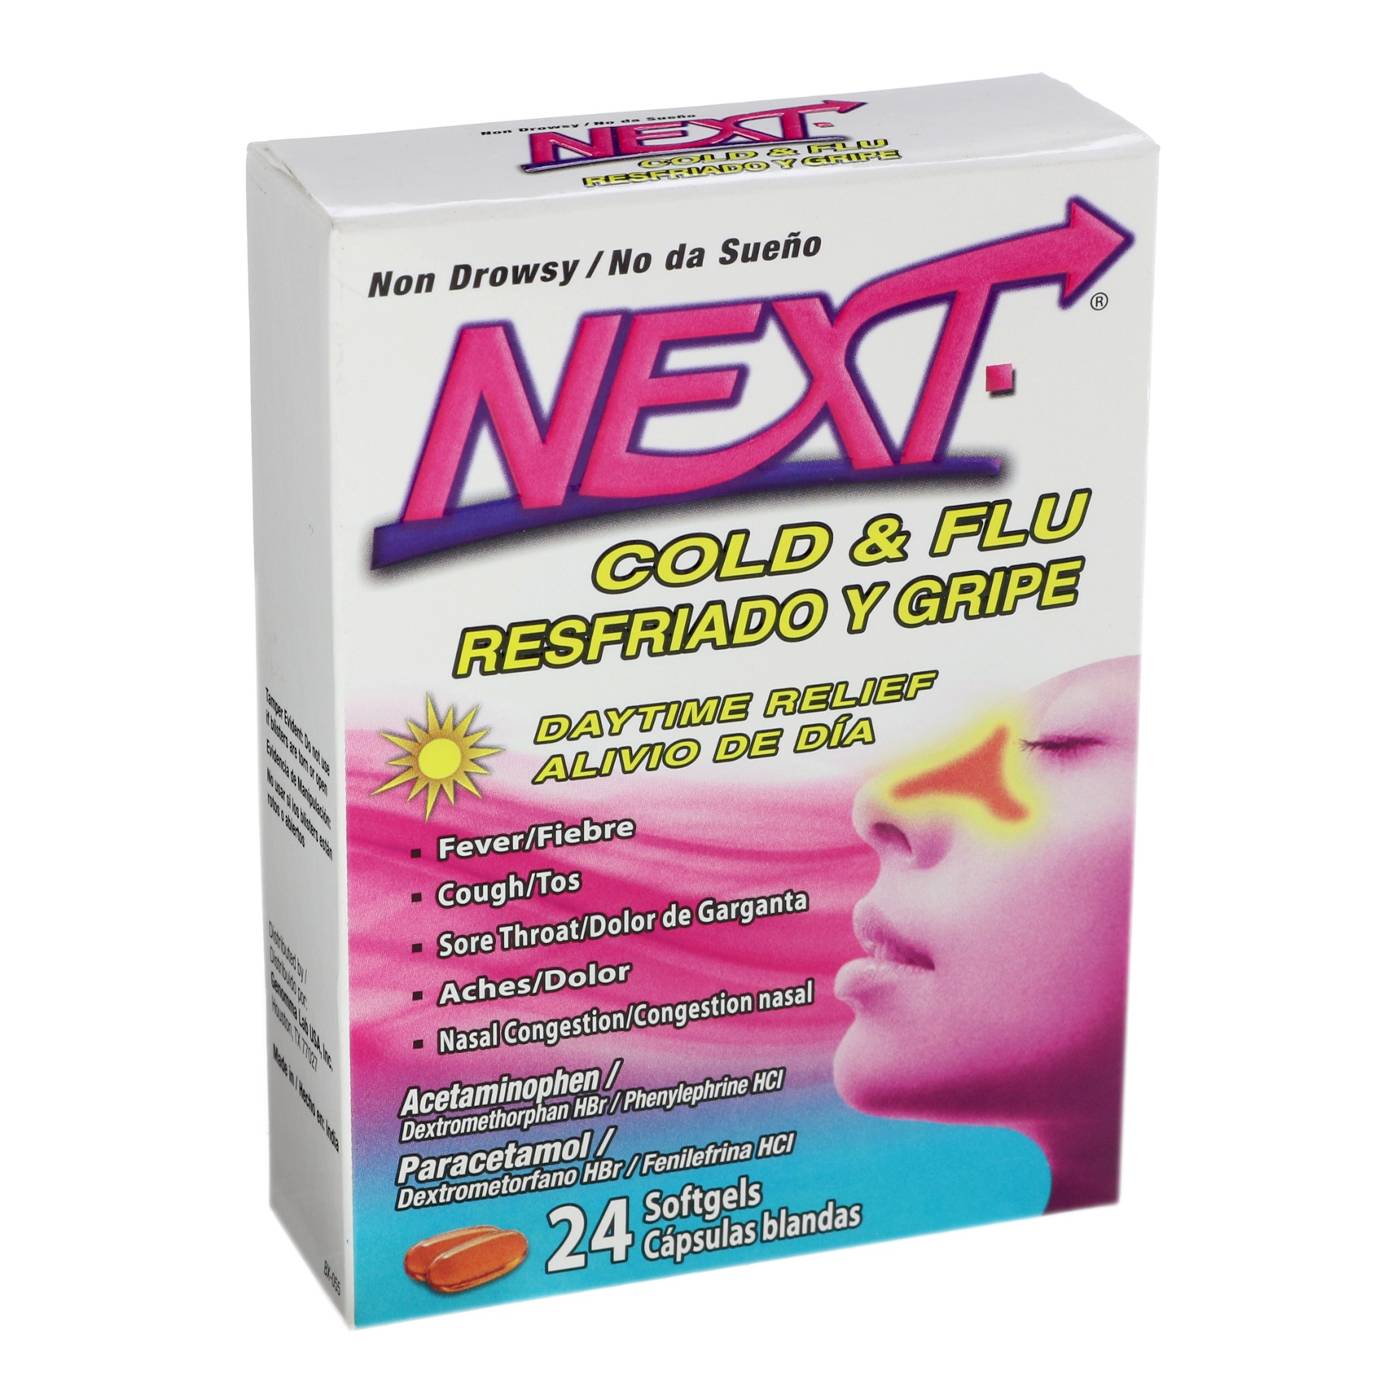 Next Cold & Flu Daytime Relief Softgels; image 1 of 2